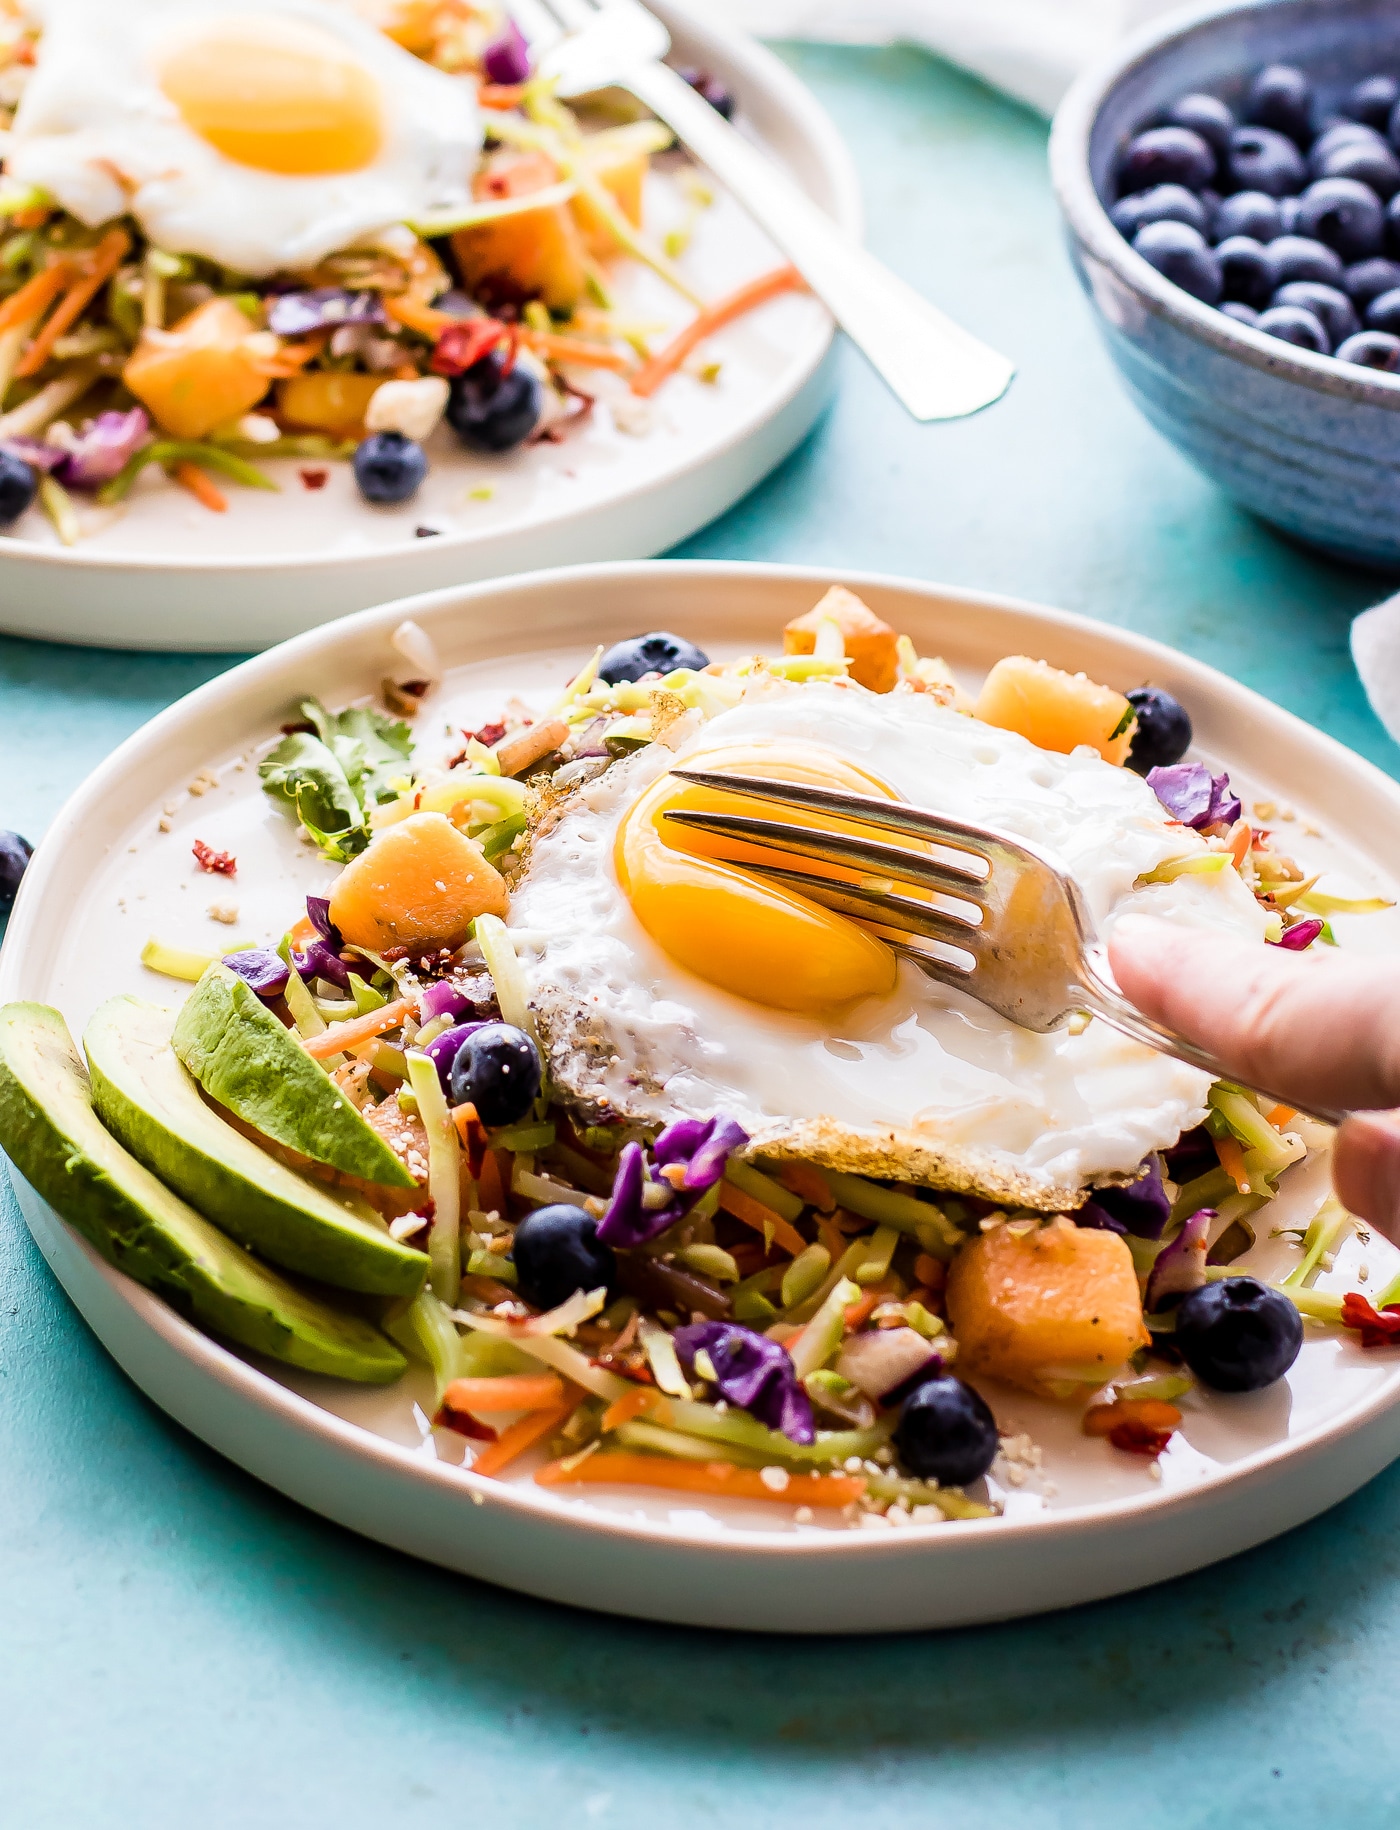 Breakfast salad to start the day! A nourishing warm Paleo meal with broccoli slaw, squash, berries, and fried eggs. A breakfast salad worth waking up for!